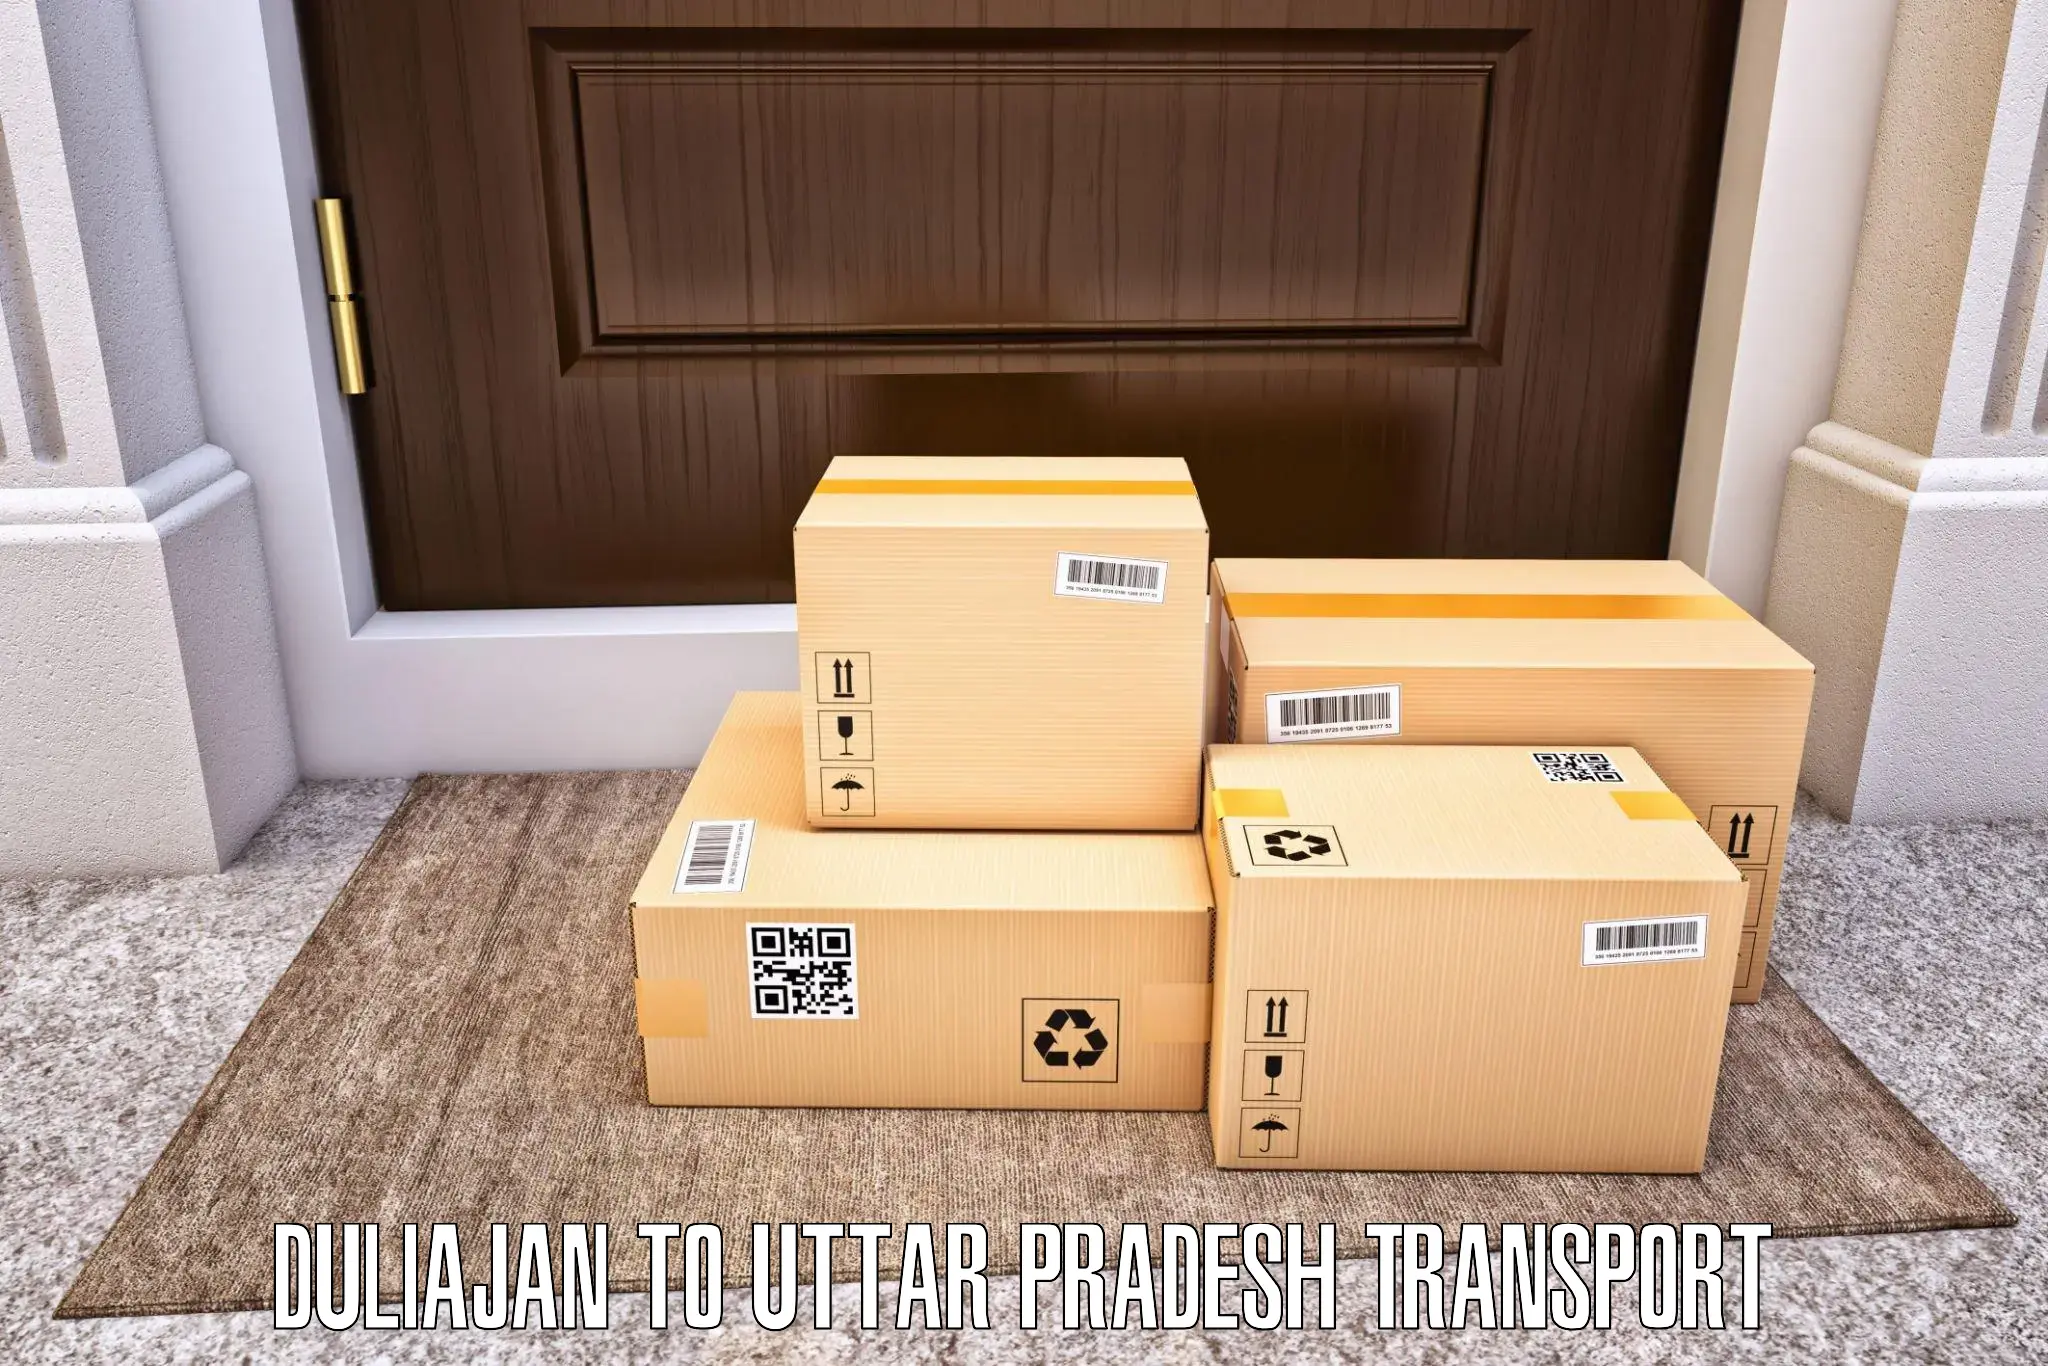 Goods delivery service Duliajan to IIT Kanpur